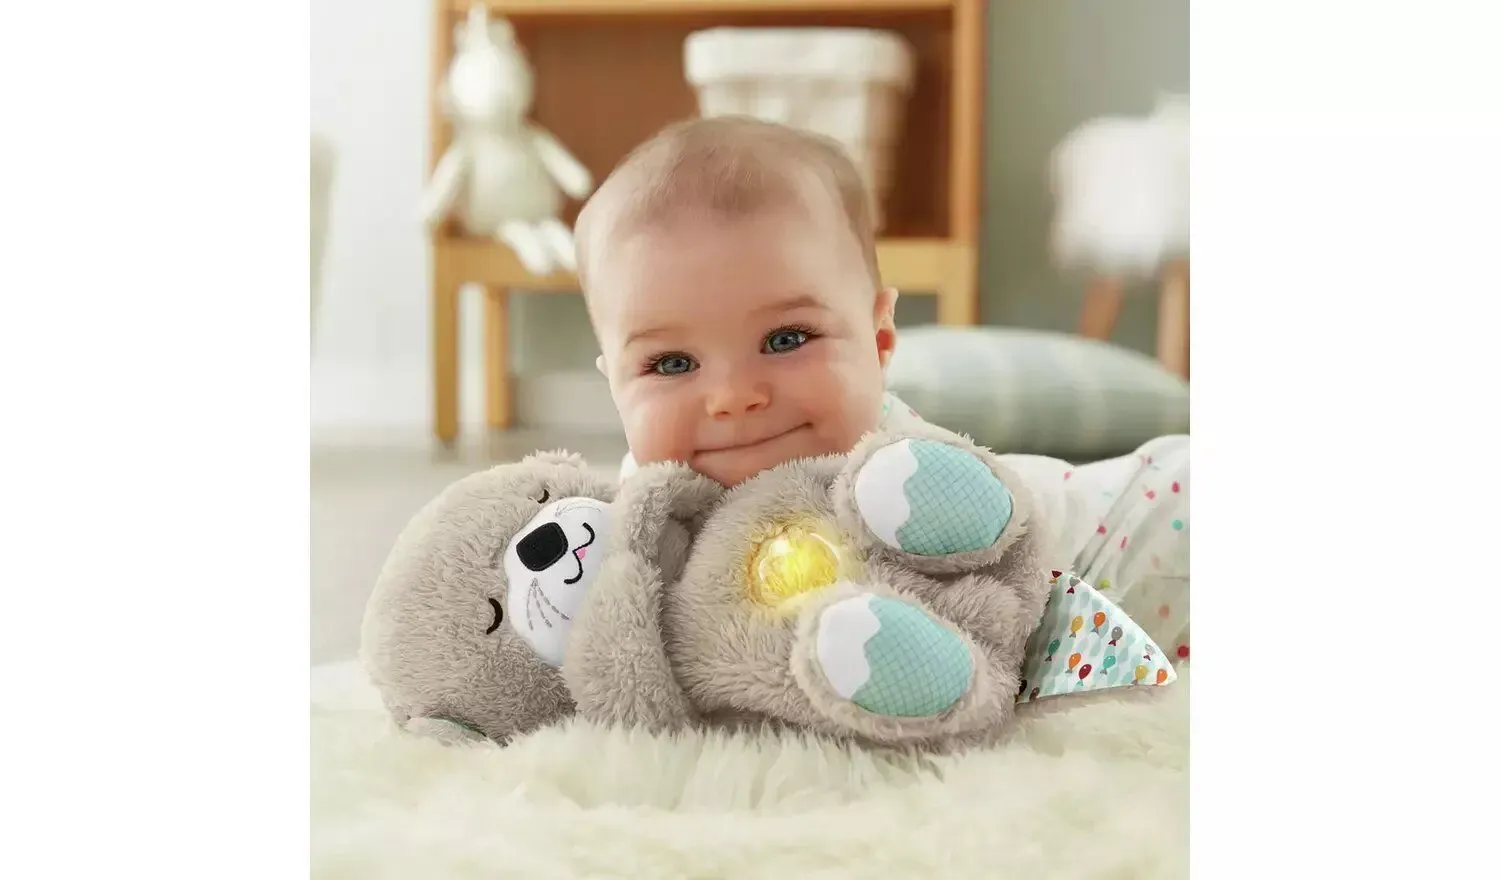 Fisher-Price Soothe'n Snuggle Otter Baby Toy.